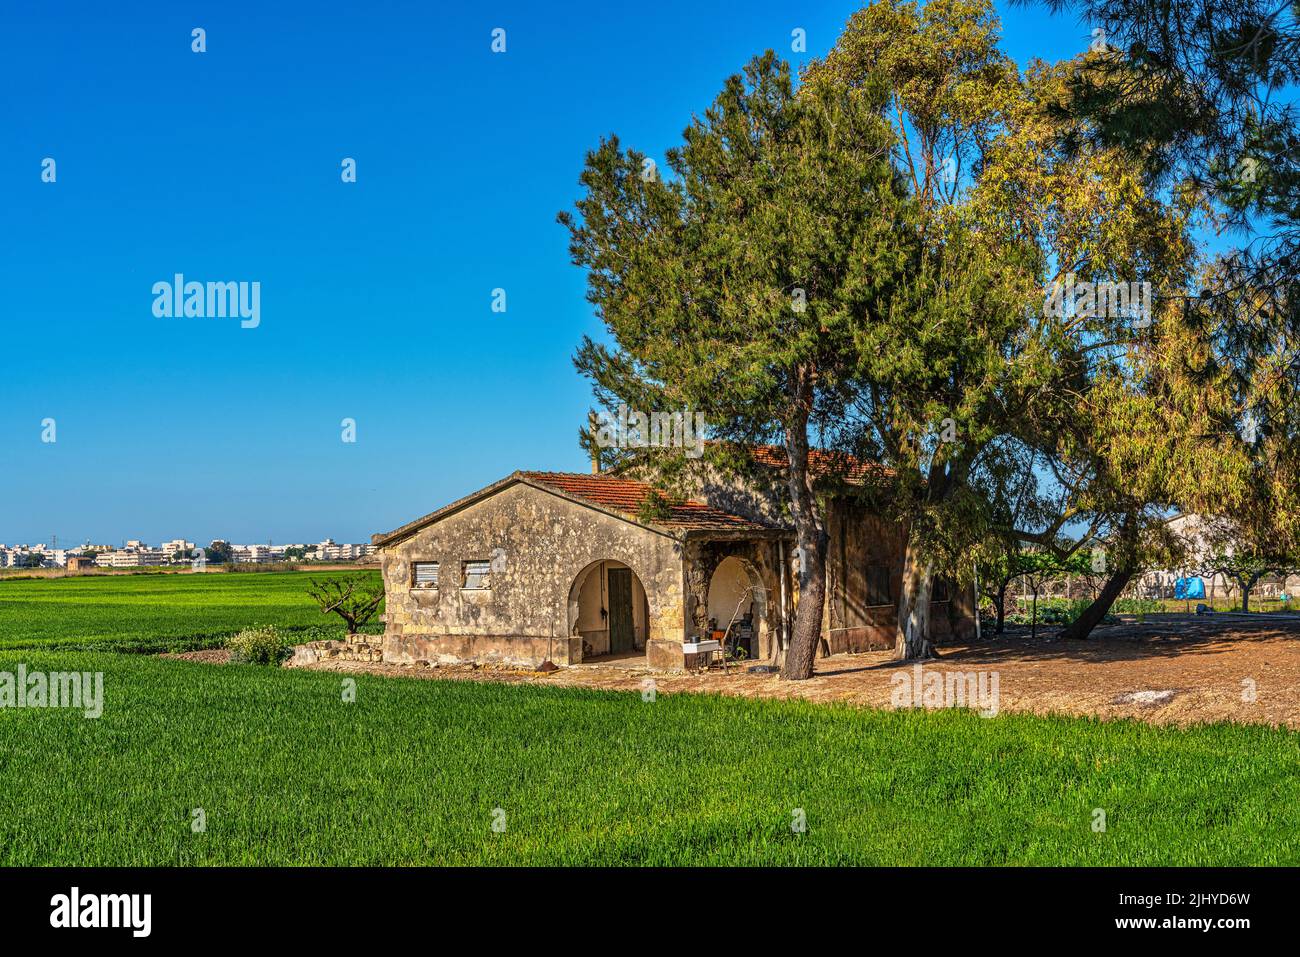 Typical rural house with an arched portico in the Apulian countryside. Gargano, Foggia province, Puglia, Italy, Europe Stock Photo